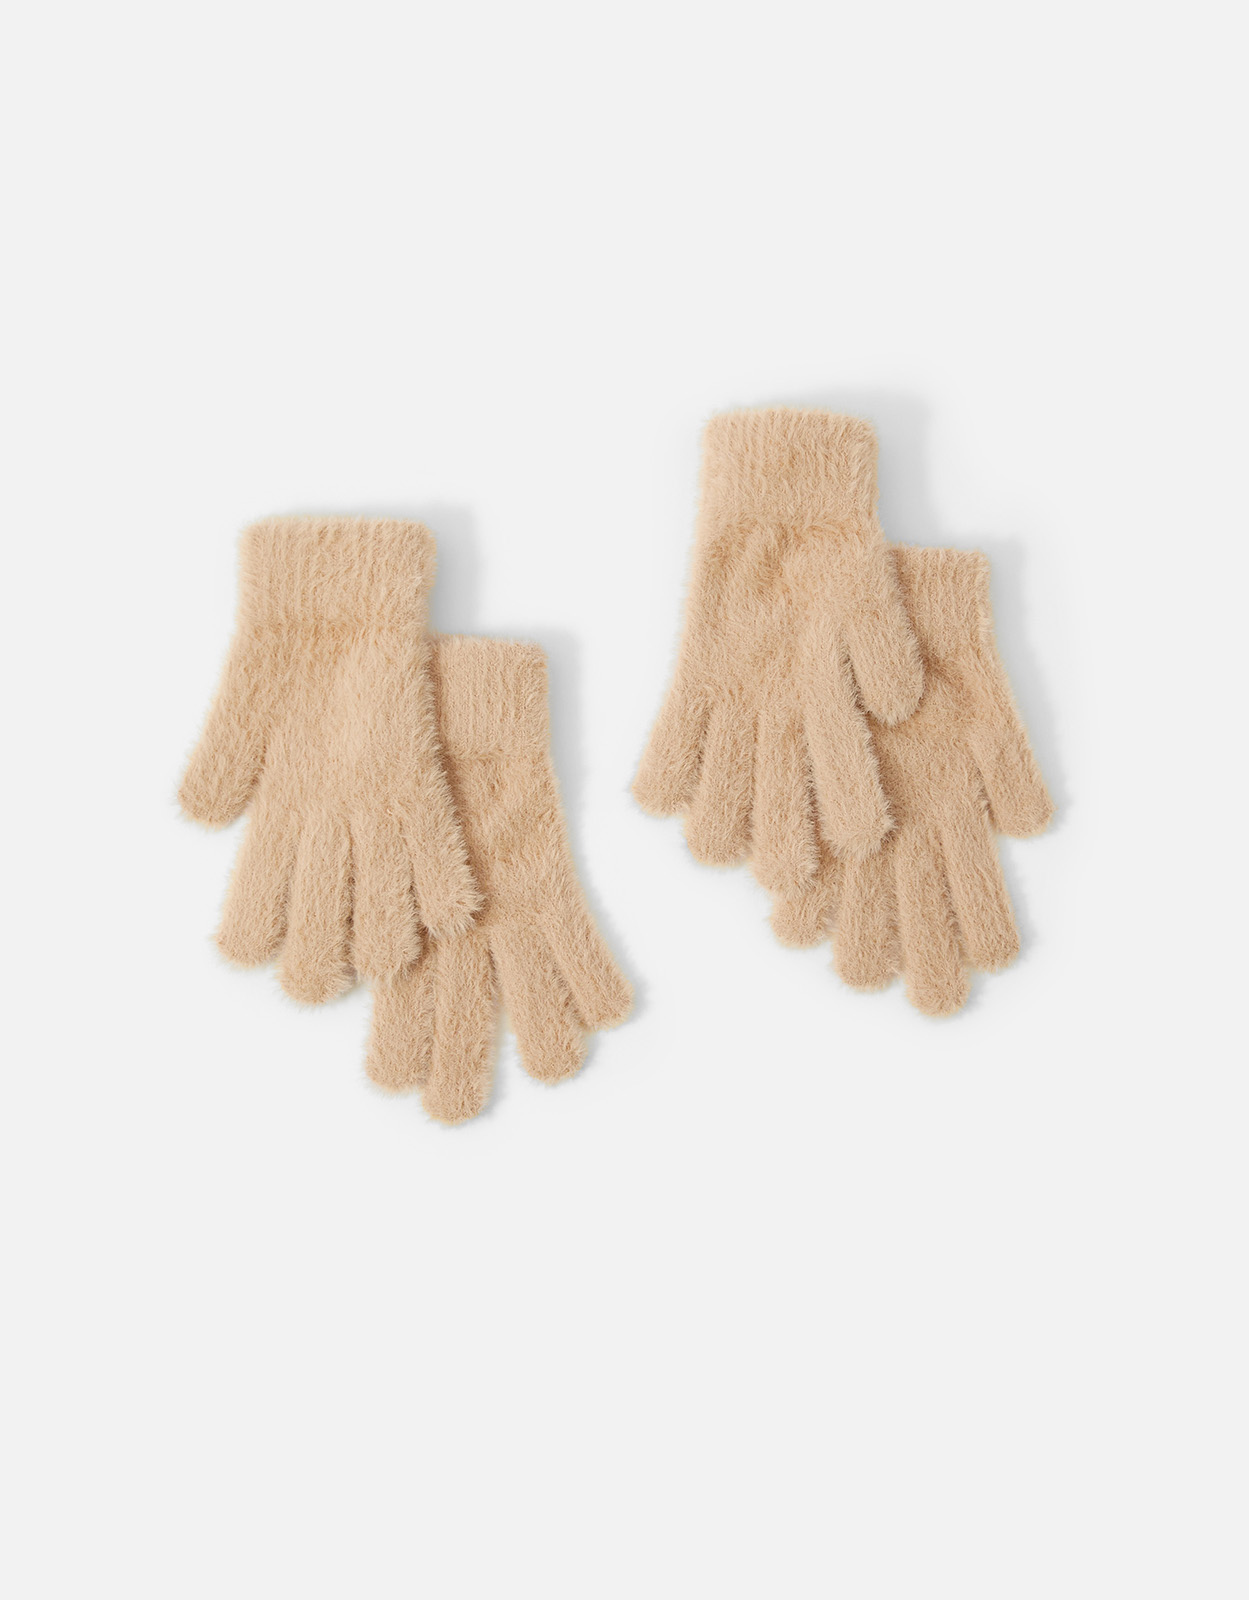 Accessorize Set of Two Light Brown Fluffy Super-Stretchy Gloves, Size: One Size